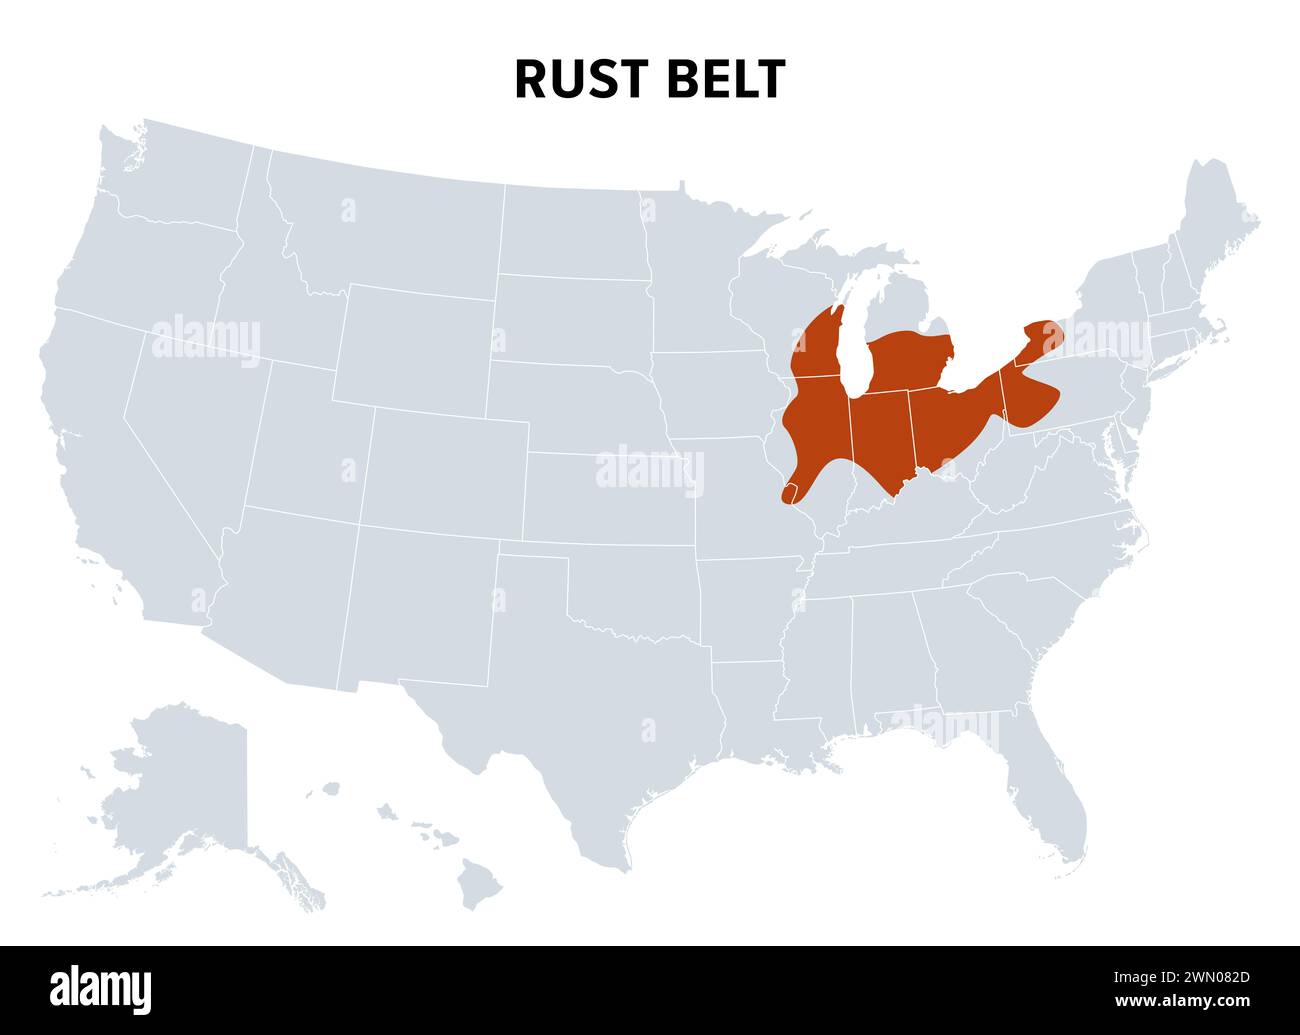 Rust Belt of the United States, political map. Region in the Northeastern and Midwestern United States, experiencing industrial and economic decline. Stock Photo